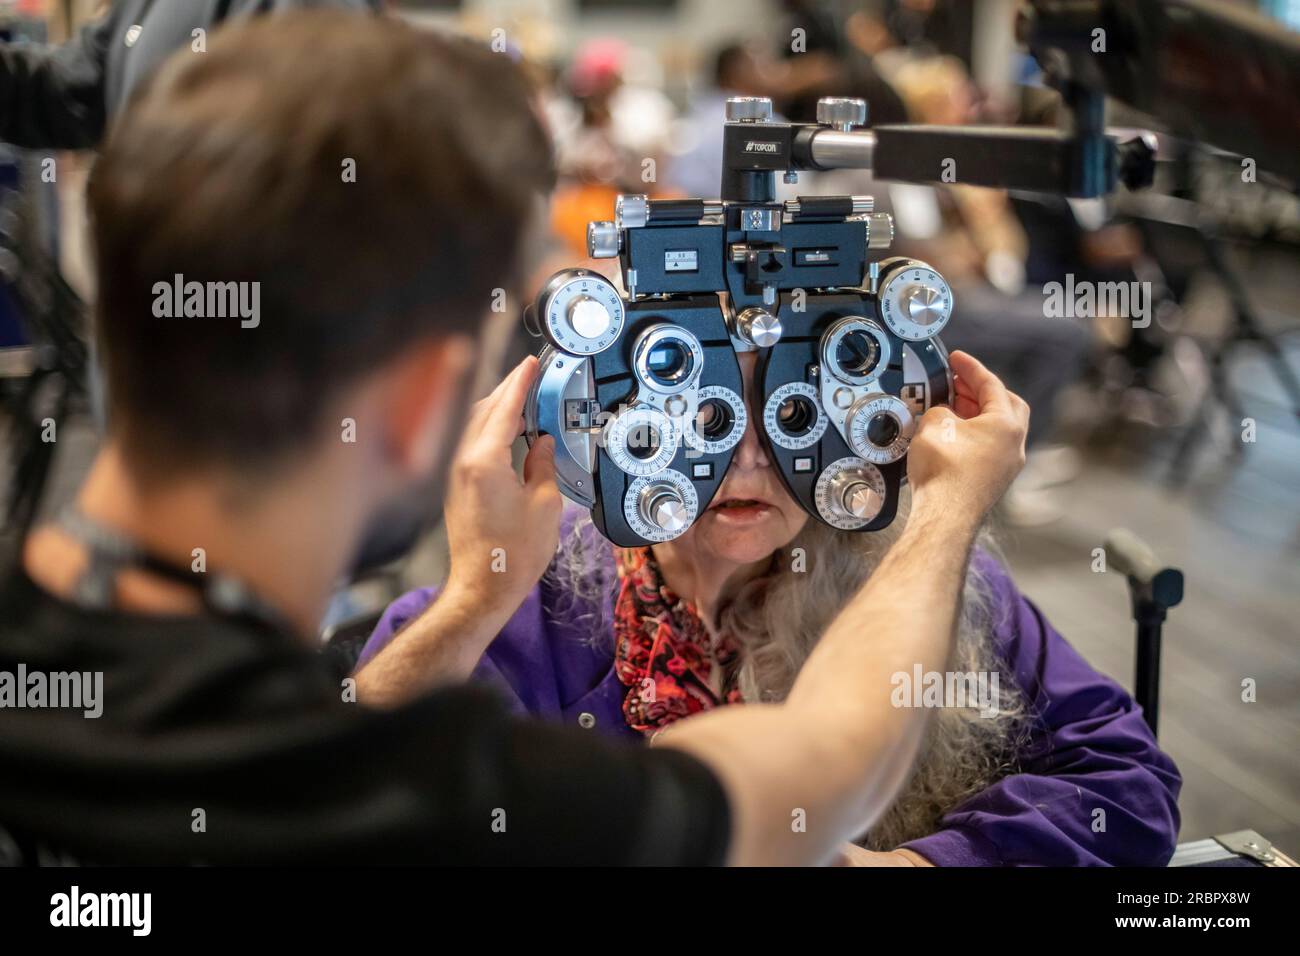 Detroit, Michigan - The OneSight Foundation organized a free clinic that offered eye exams and prescription glasses for low-income residents. OneSight Stock Photo